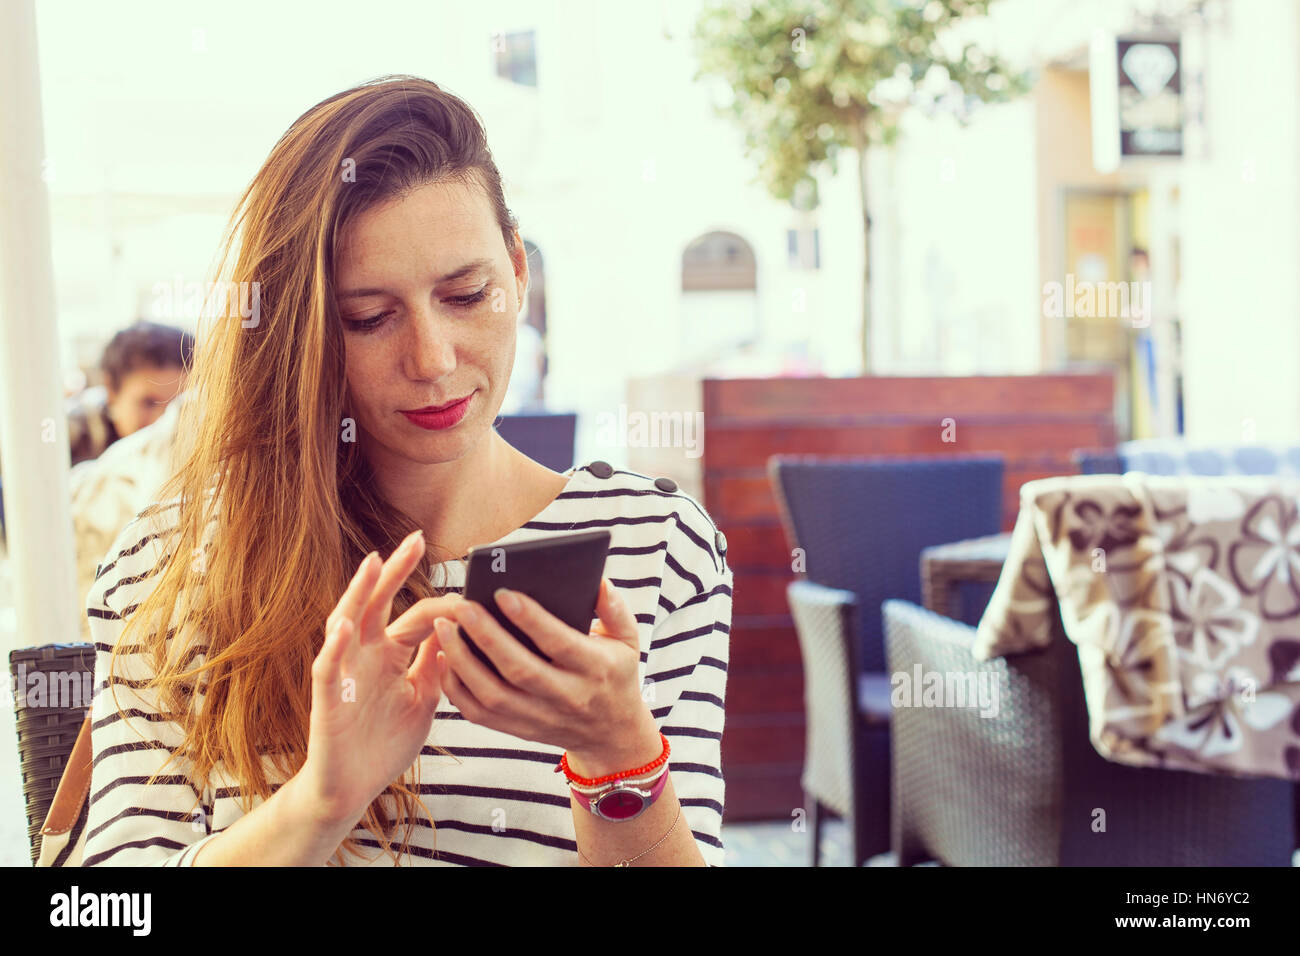 Young lady on bar table using a smart phone, dialing or using some app or sending sms, casual look, stripes shirt and light make up, hipster vintage c Stock Photo